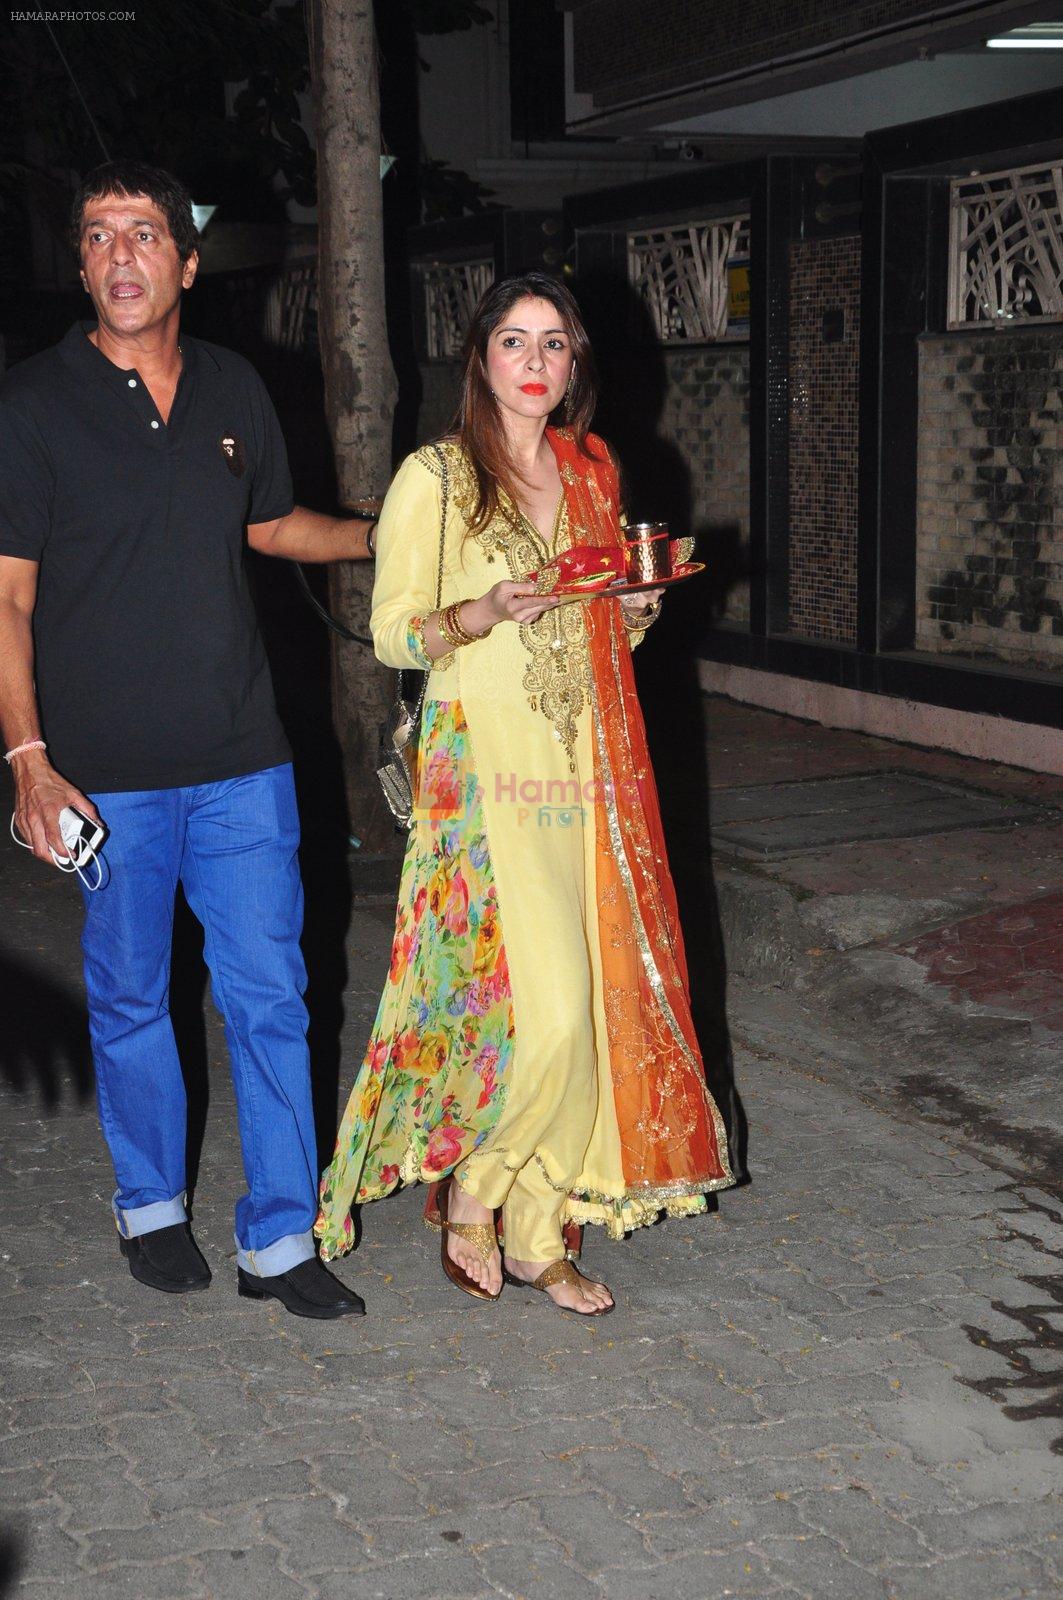 Chunky Pandey celebrate Karva Chauth at Anil Kapoor�s house in Juhu on 19th Oct 2016